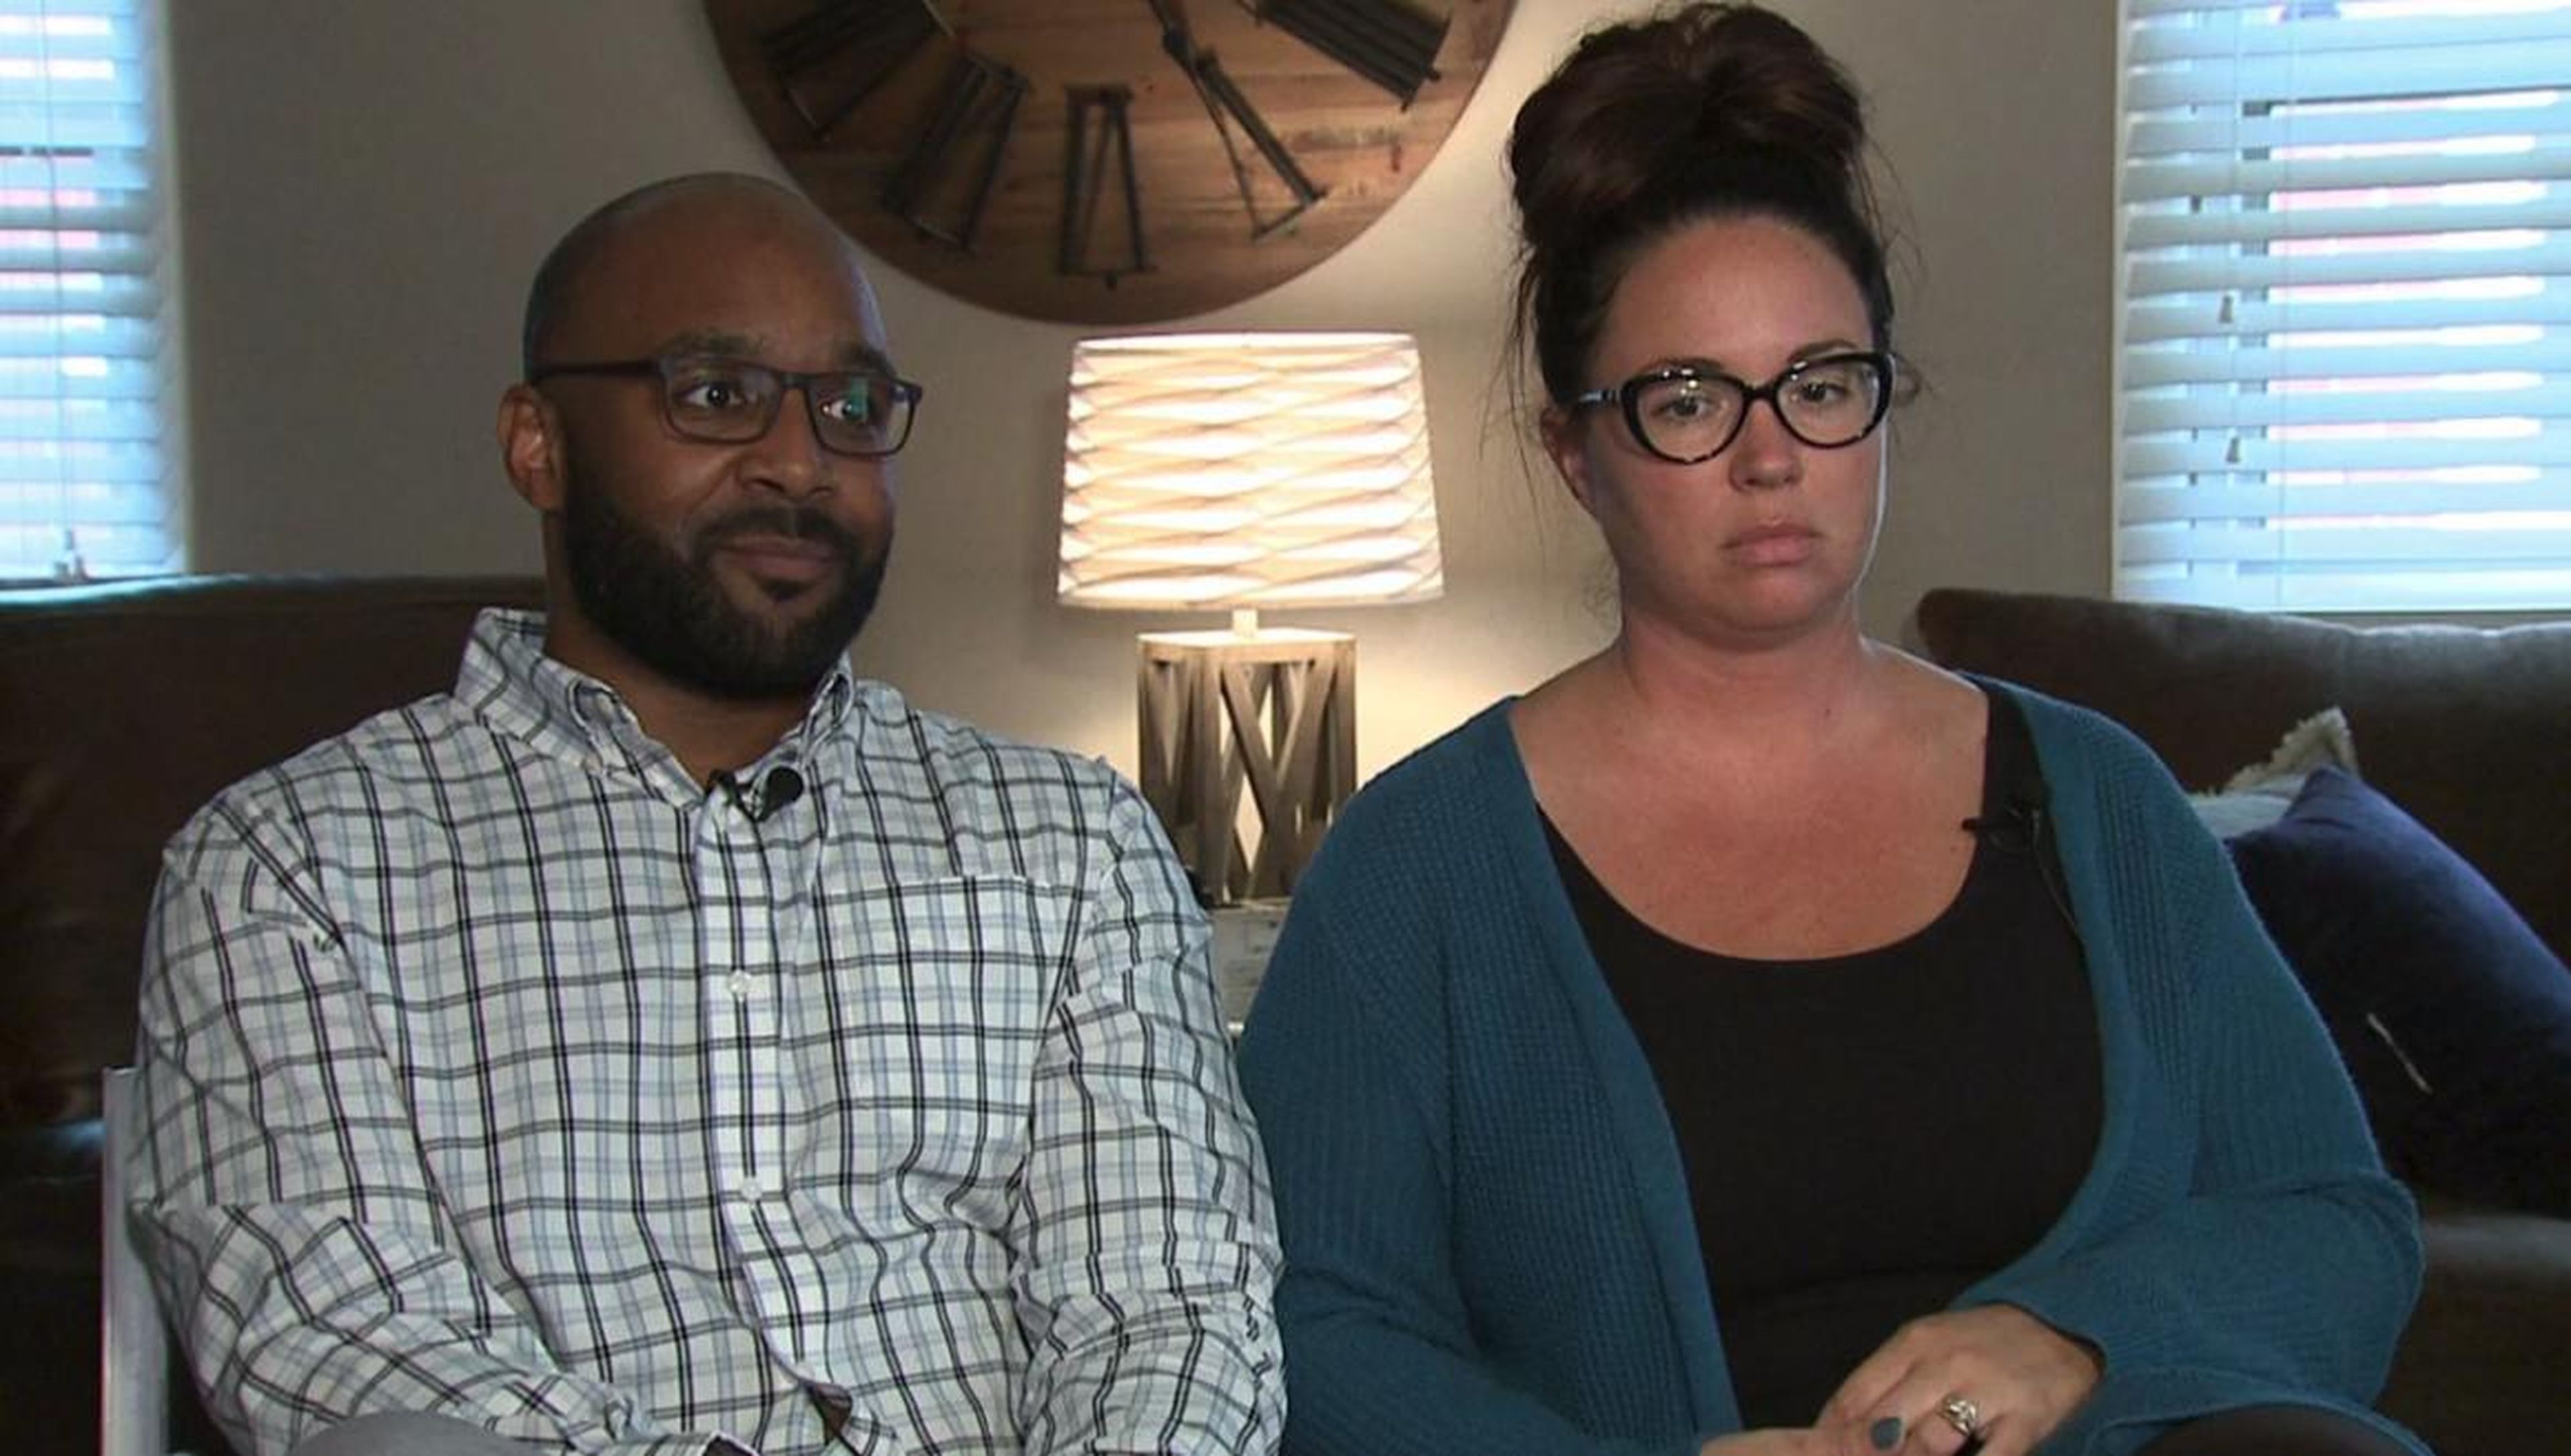 A couple said their smart-home devices were hacked.